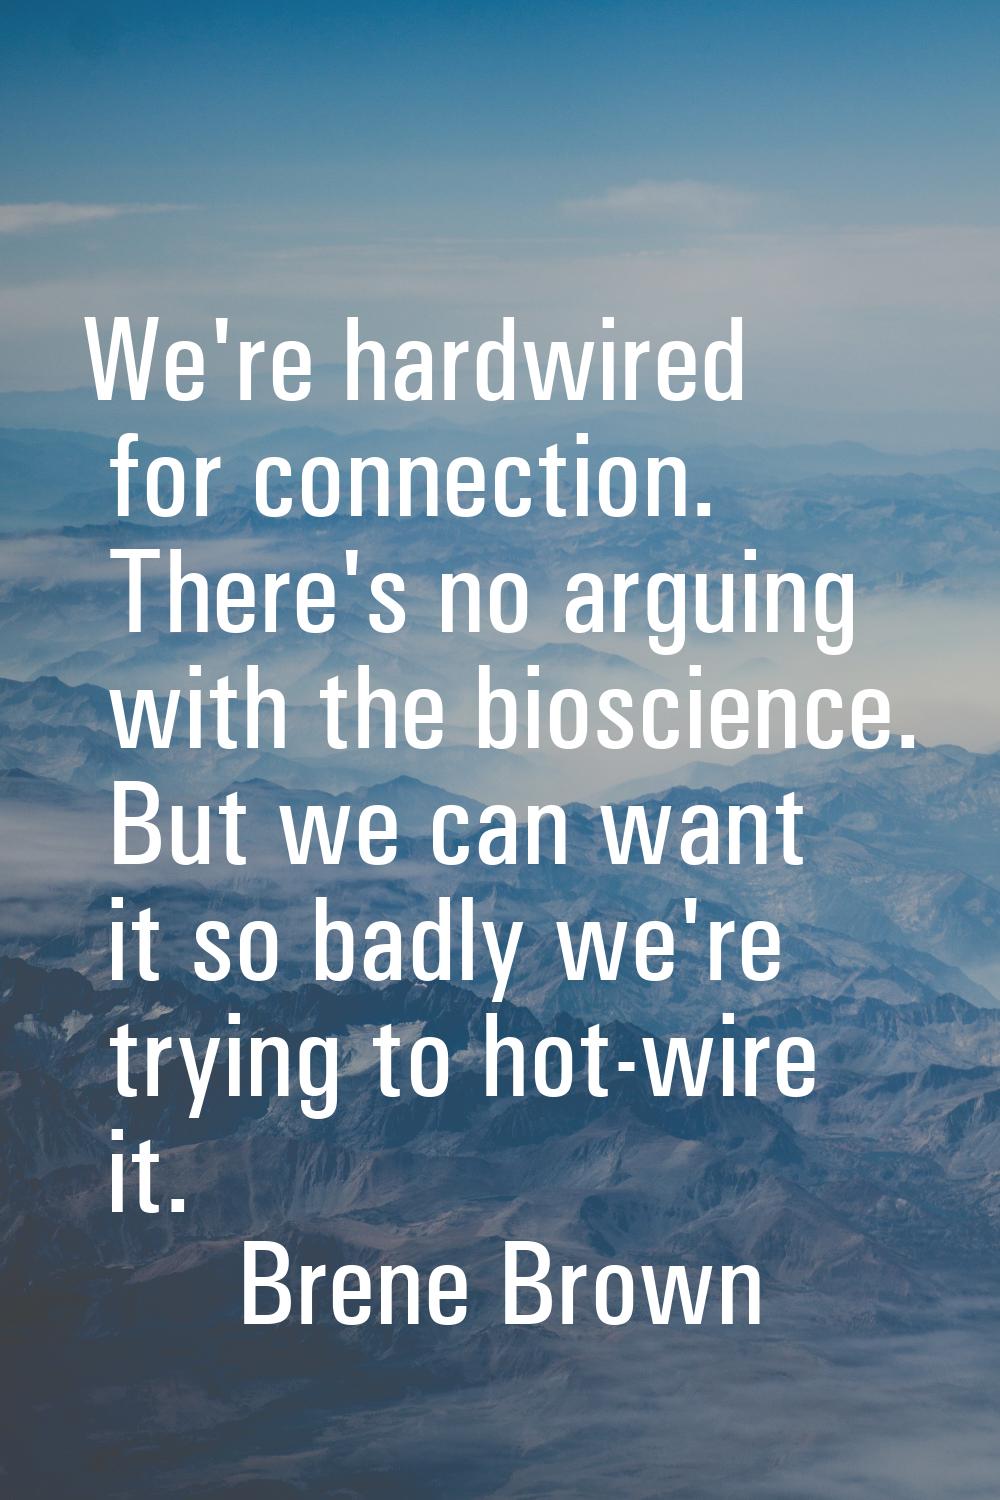 We're hardwired for connection. There's no arguing with the bioscience. But we can want it so badly